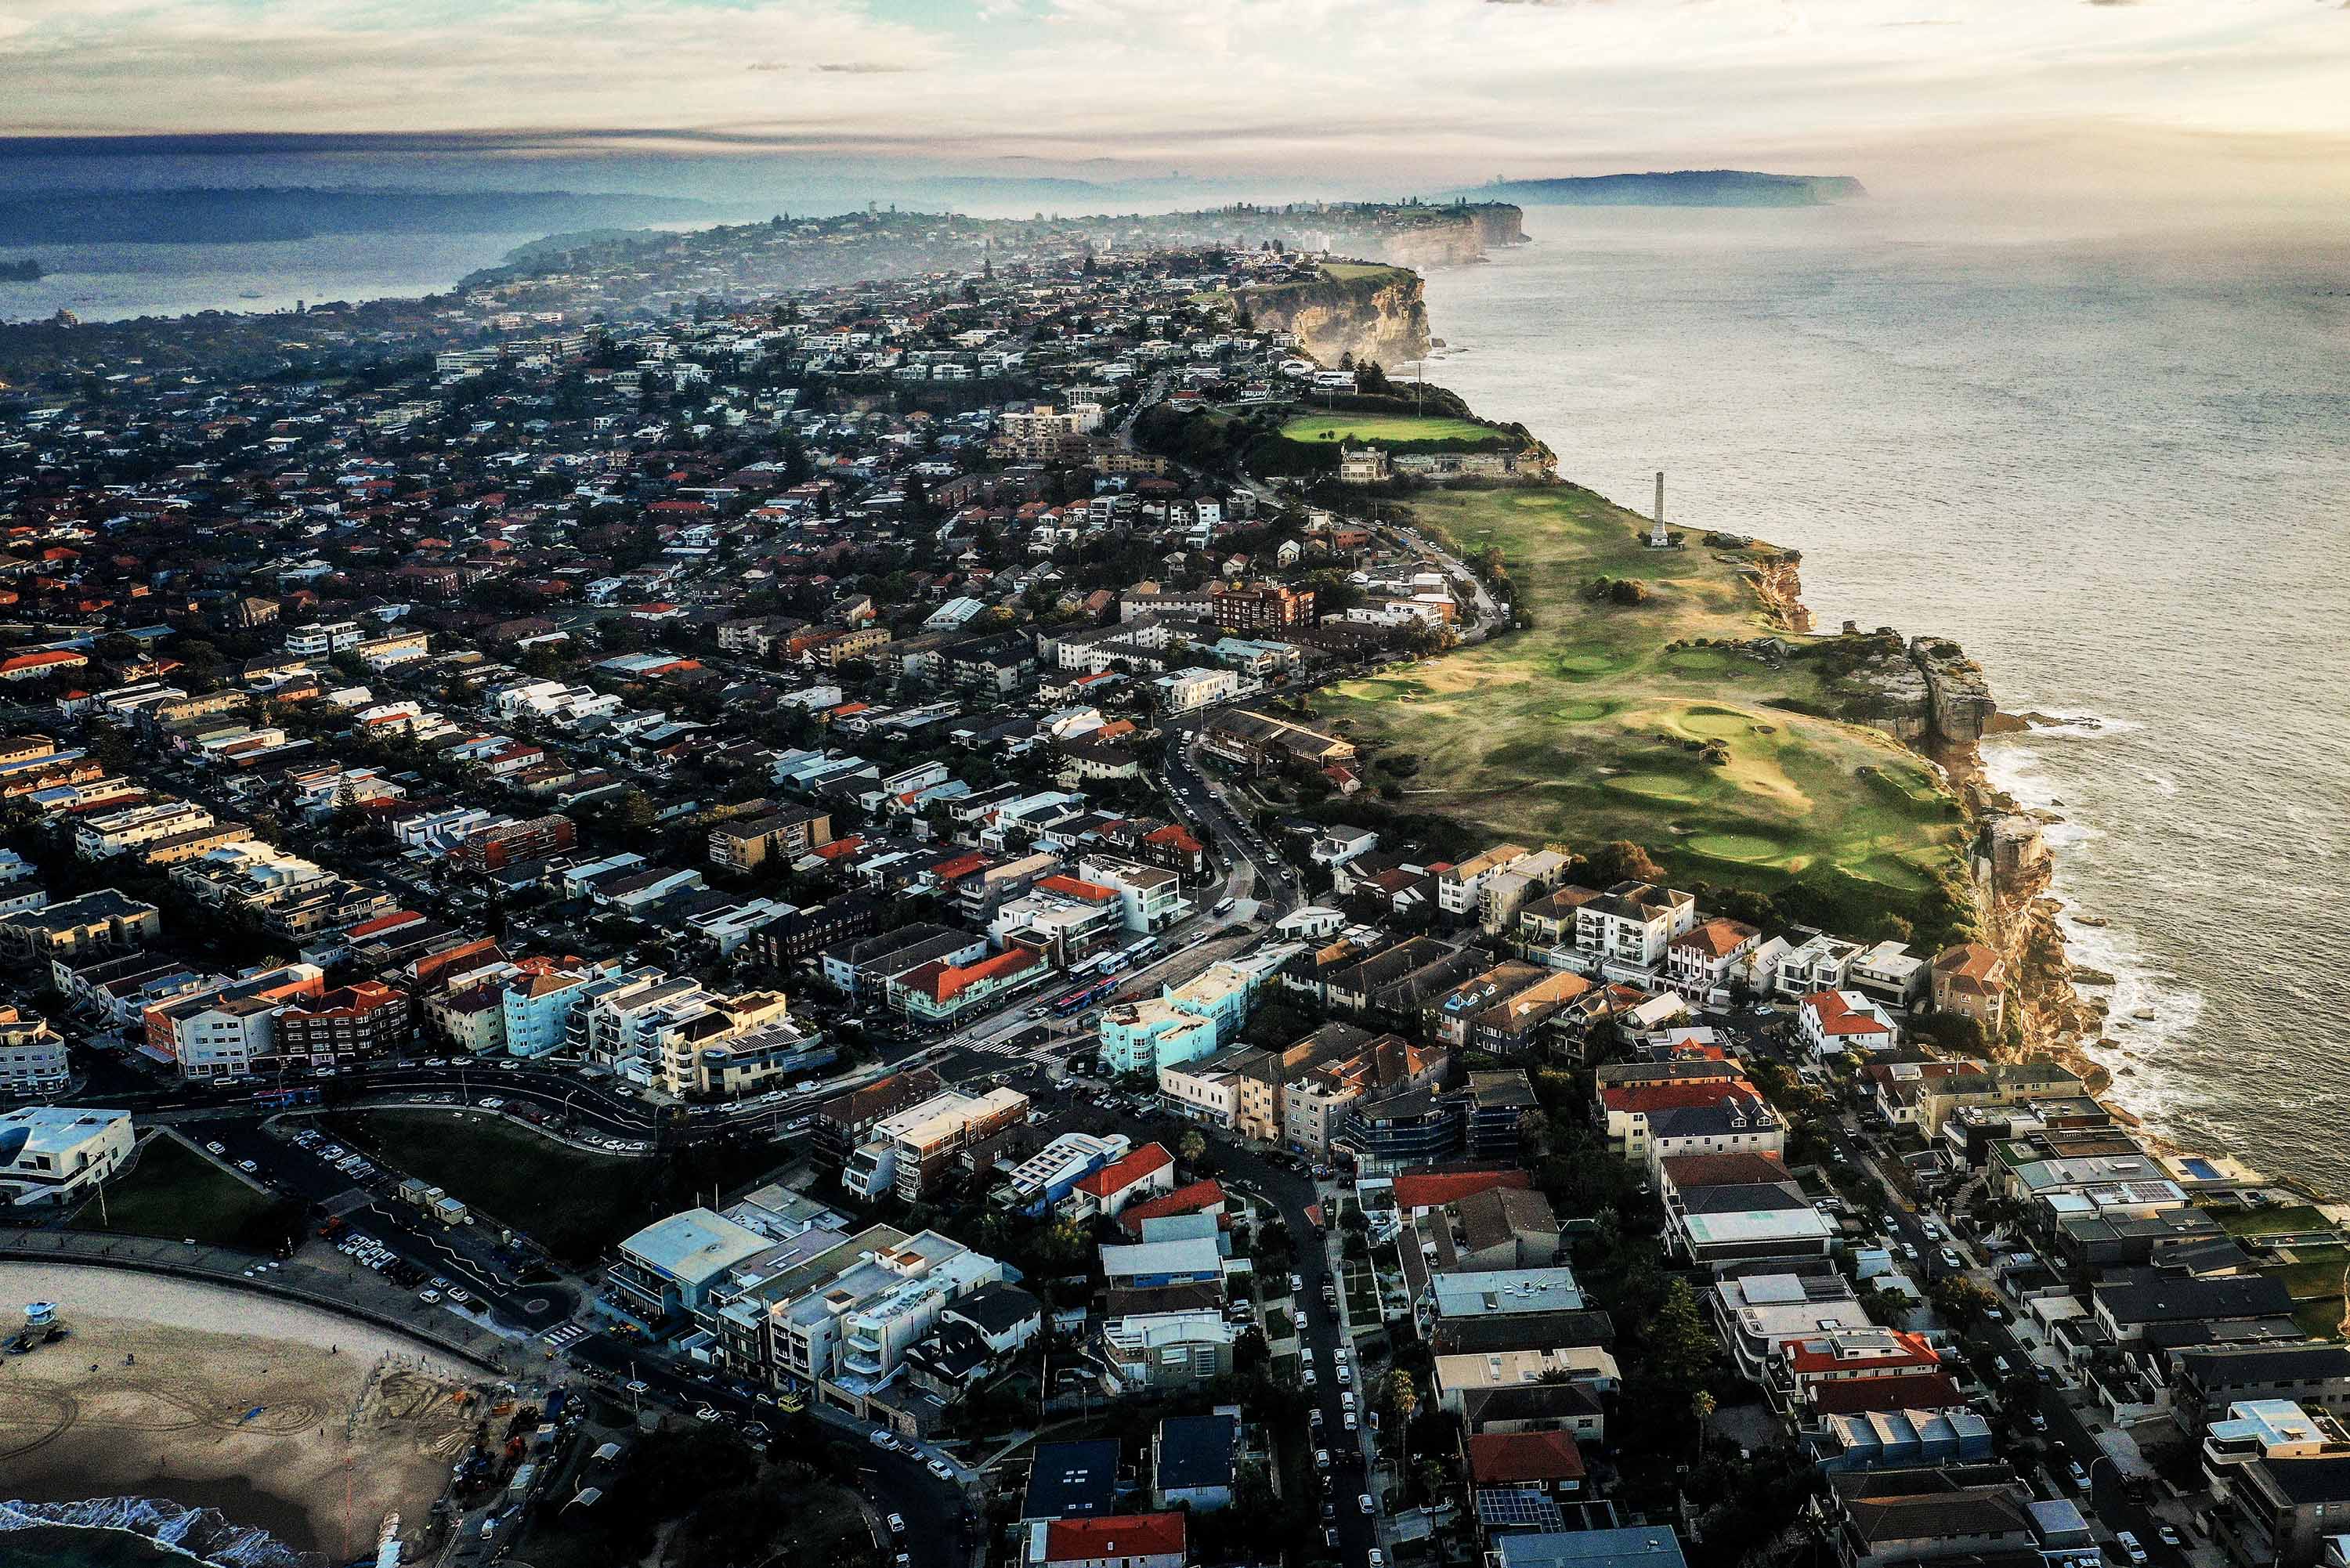 Aerial view of a coastal town at dusk, dense buildings, green cliffside, vast ocean extending into the horizon.